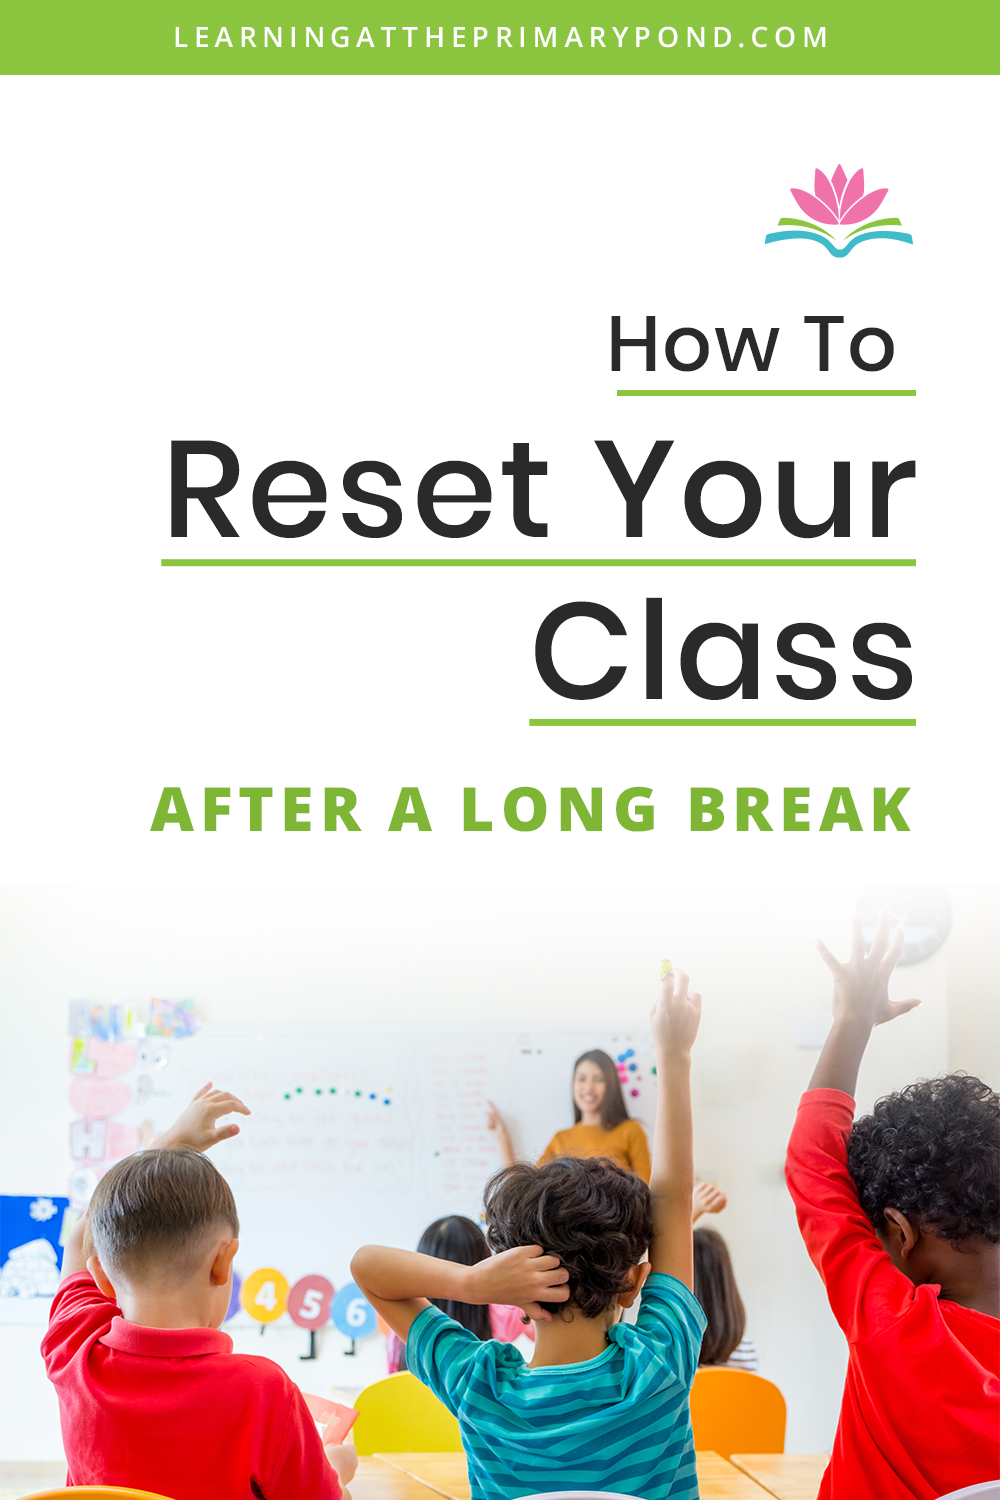 How To Reset Your Class After A Long Break